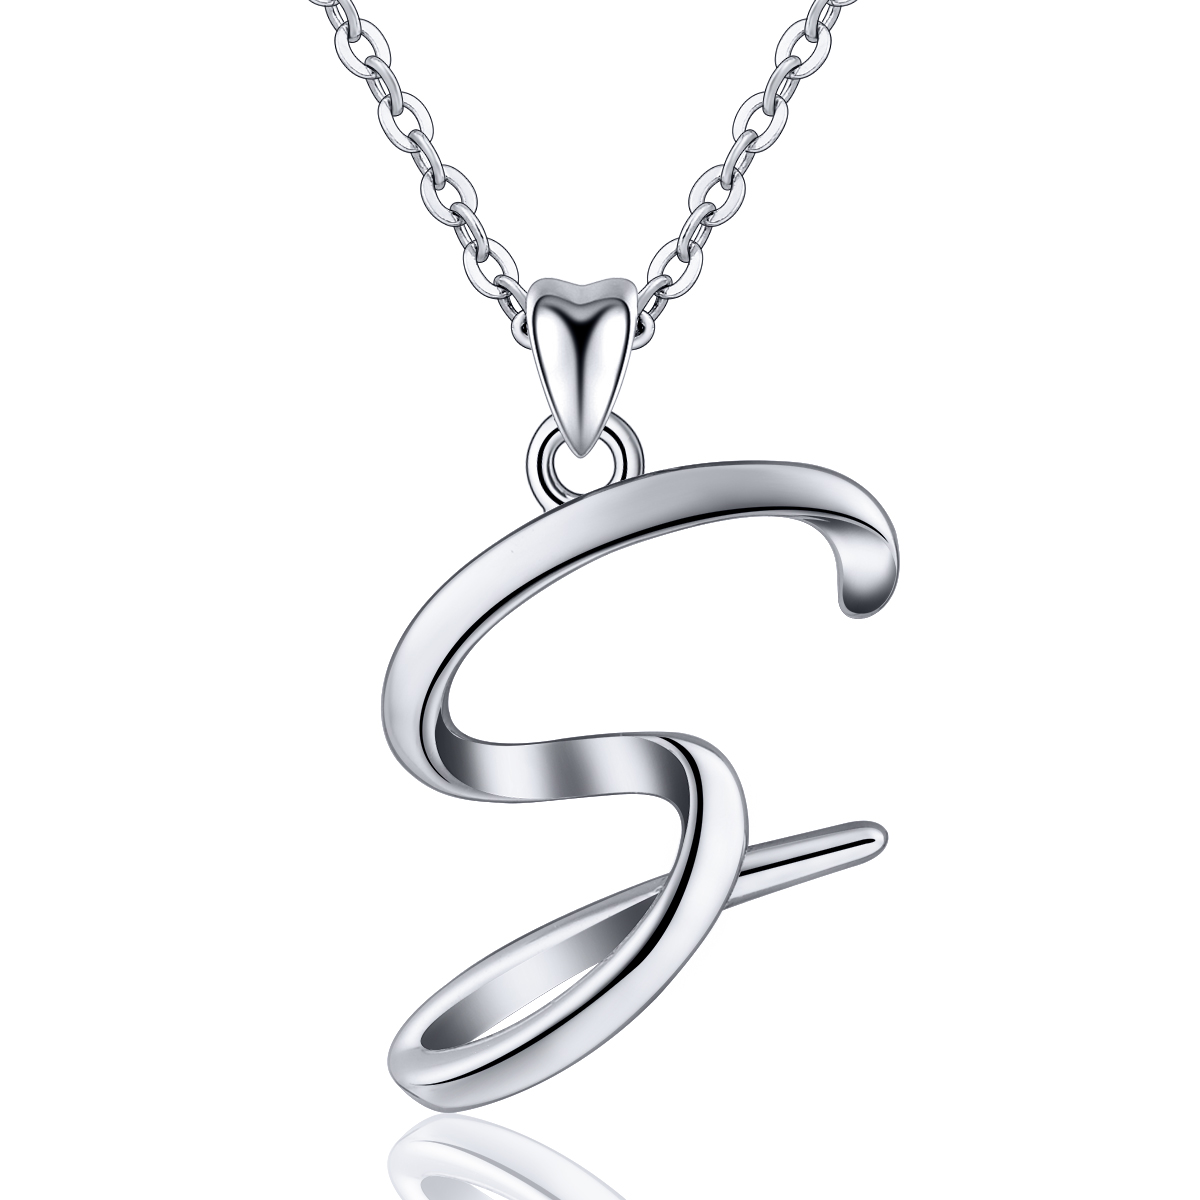 First-Rate Letter S Shape Unisex Pendants 925 Sterling Sliver Necklace Chain